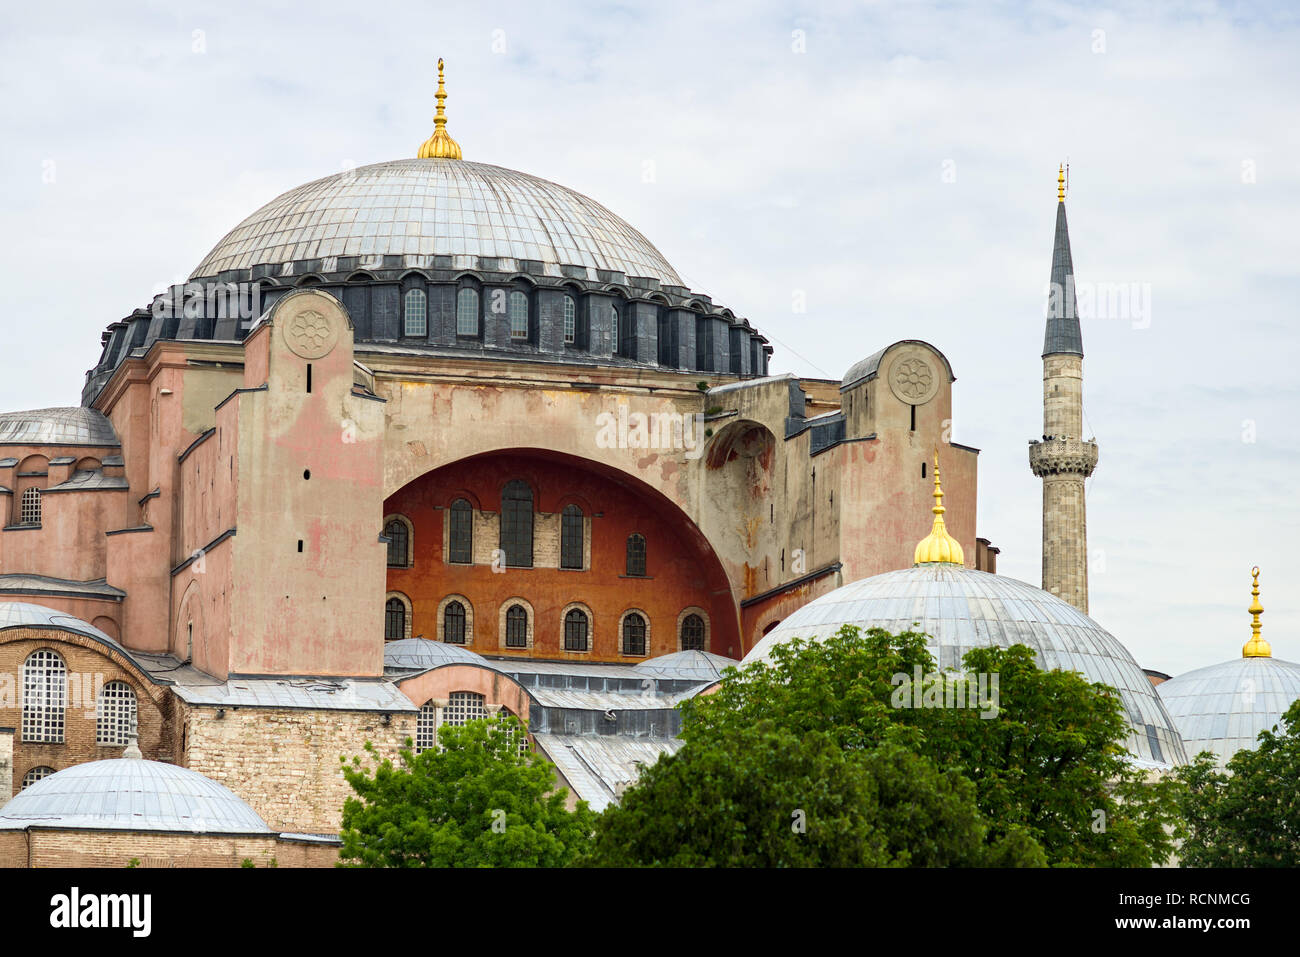 Exterior of the Hagia Sophia museum showing main dome and facade, Istanbul, Turkey Stock Photo